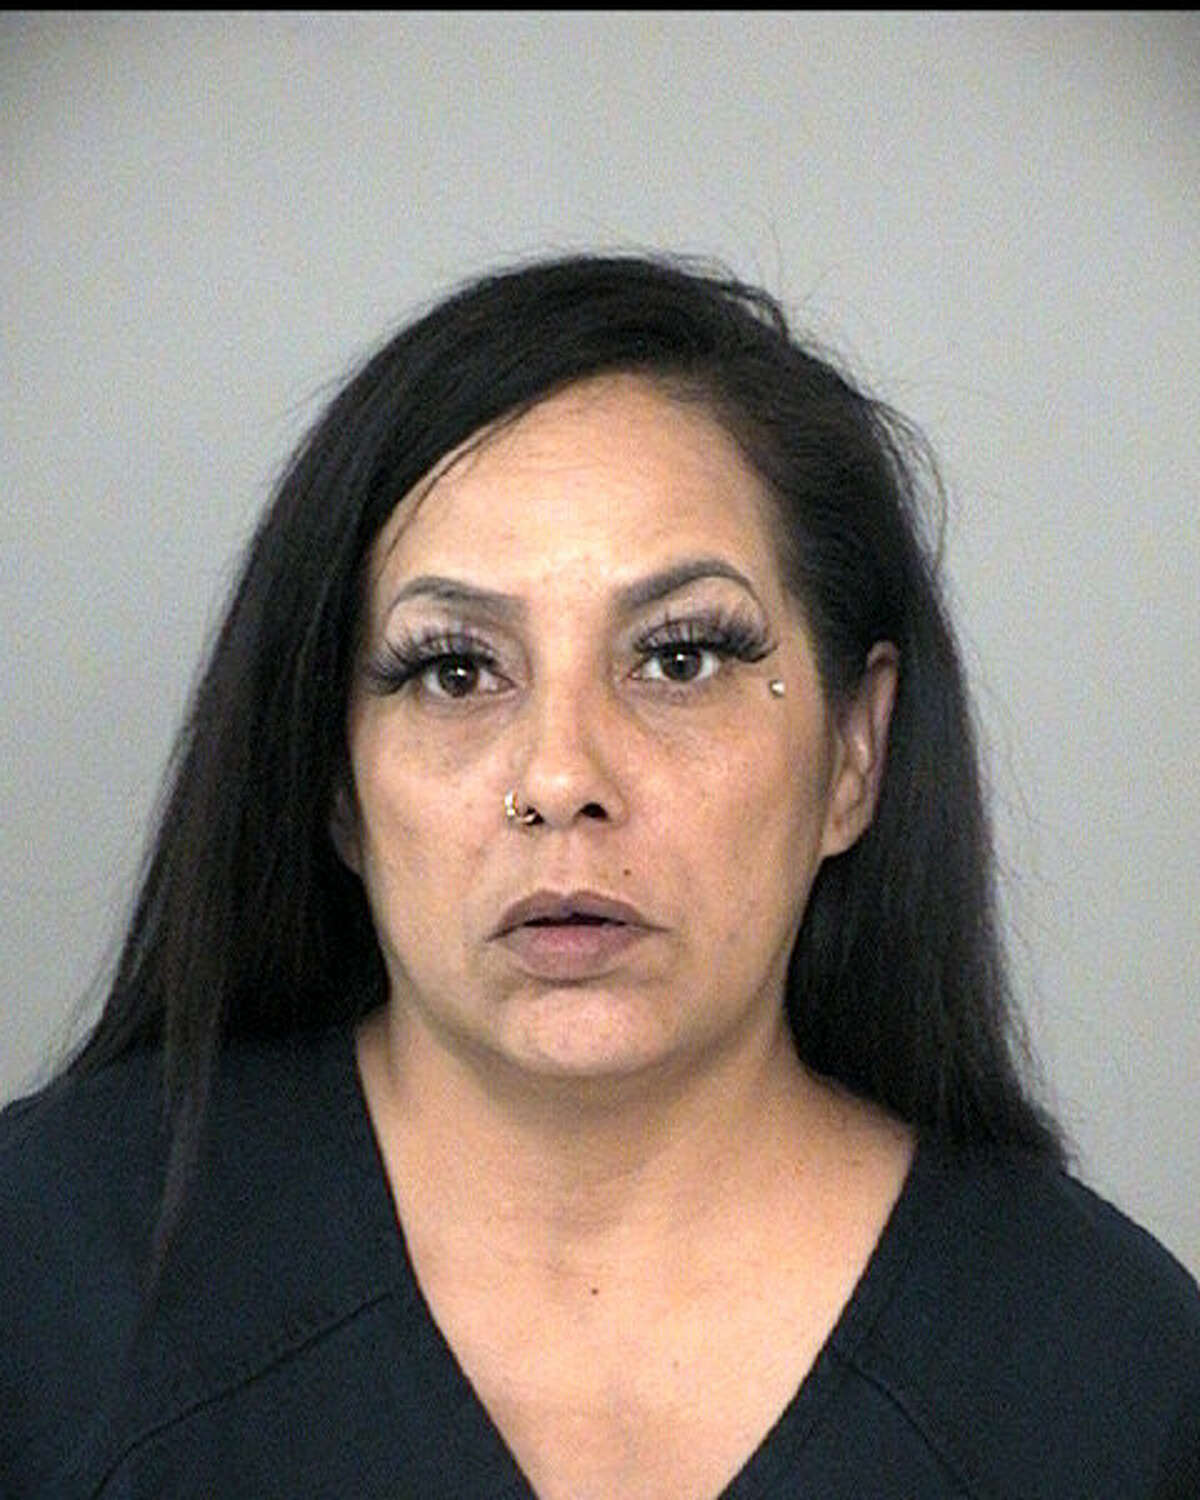 Leslie Garcia, 46, of Rosenberg was found guilty last month of theft and misapplication of fiduciary duty in connection to her alleged theft over the course of 22 months of $288,846.92 from a Sugar  Land company, per a release from the Fort Bend County District Attorney’s Office.